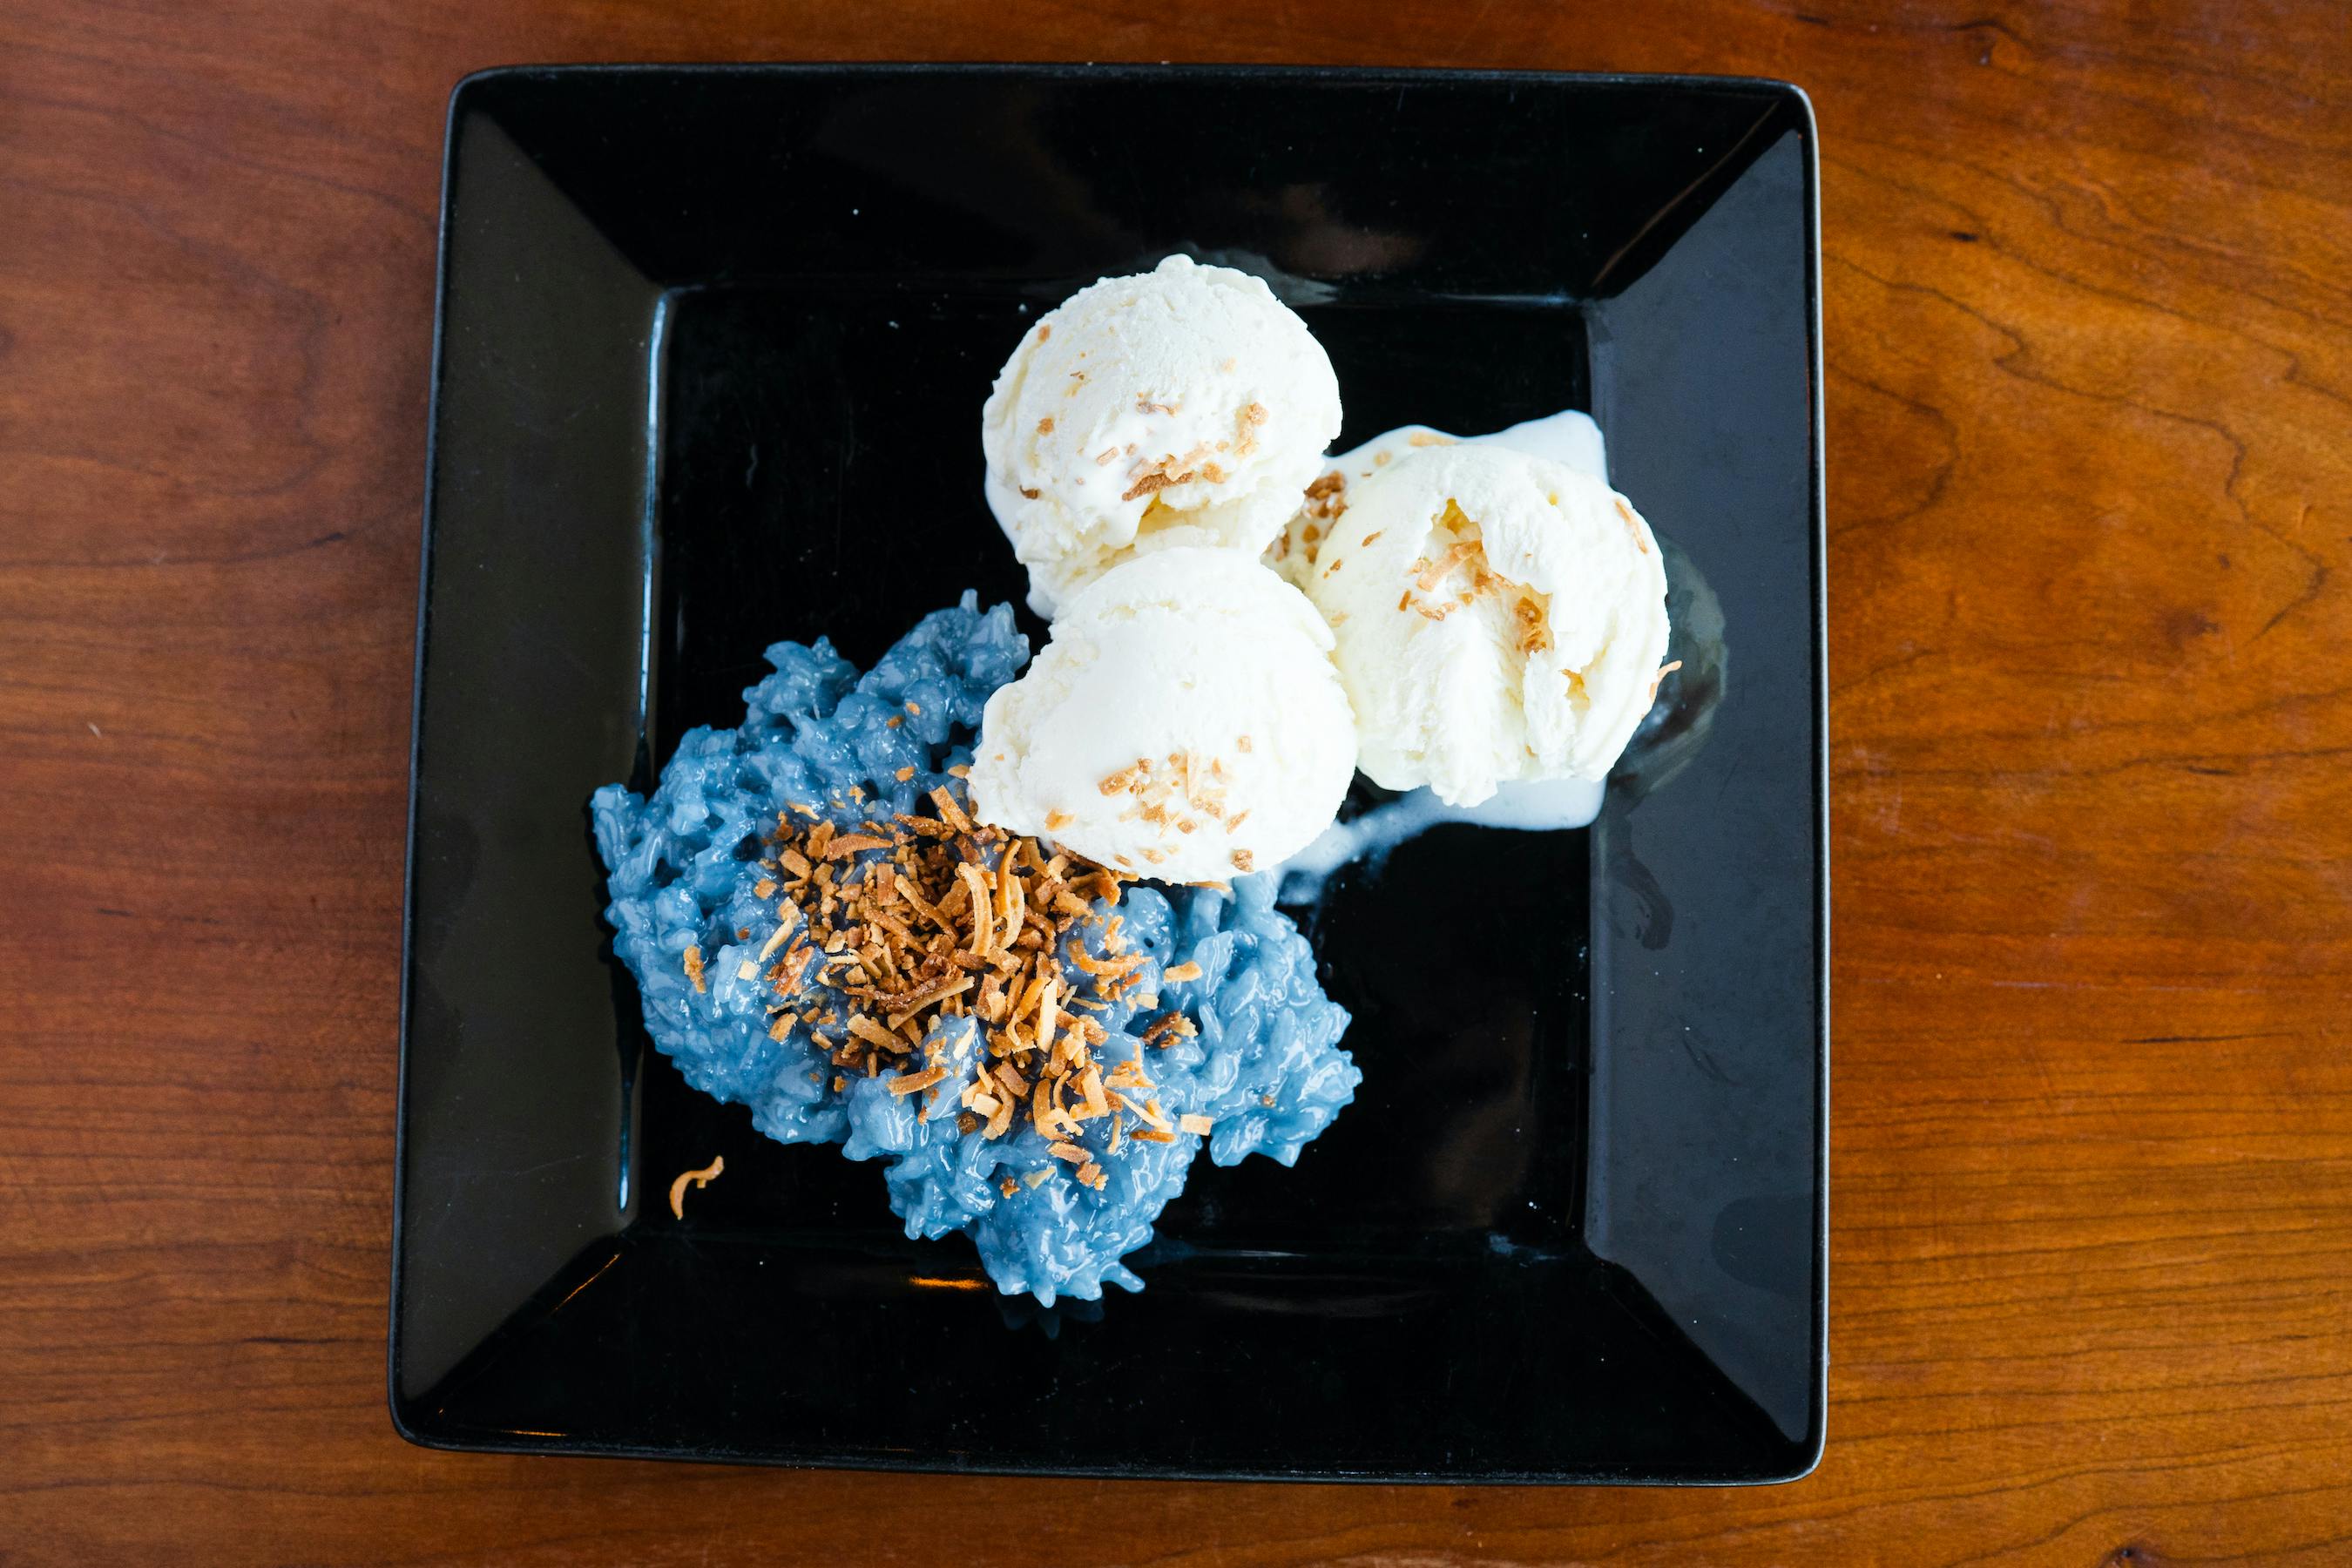 Sweet Rice with Ice Cream from City Thai Cuisine in Portland, OR